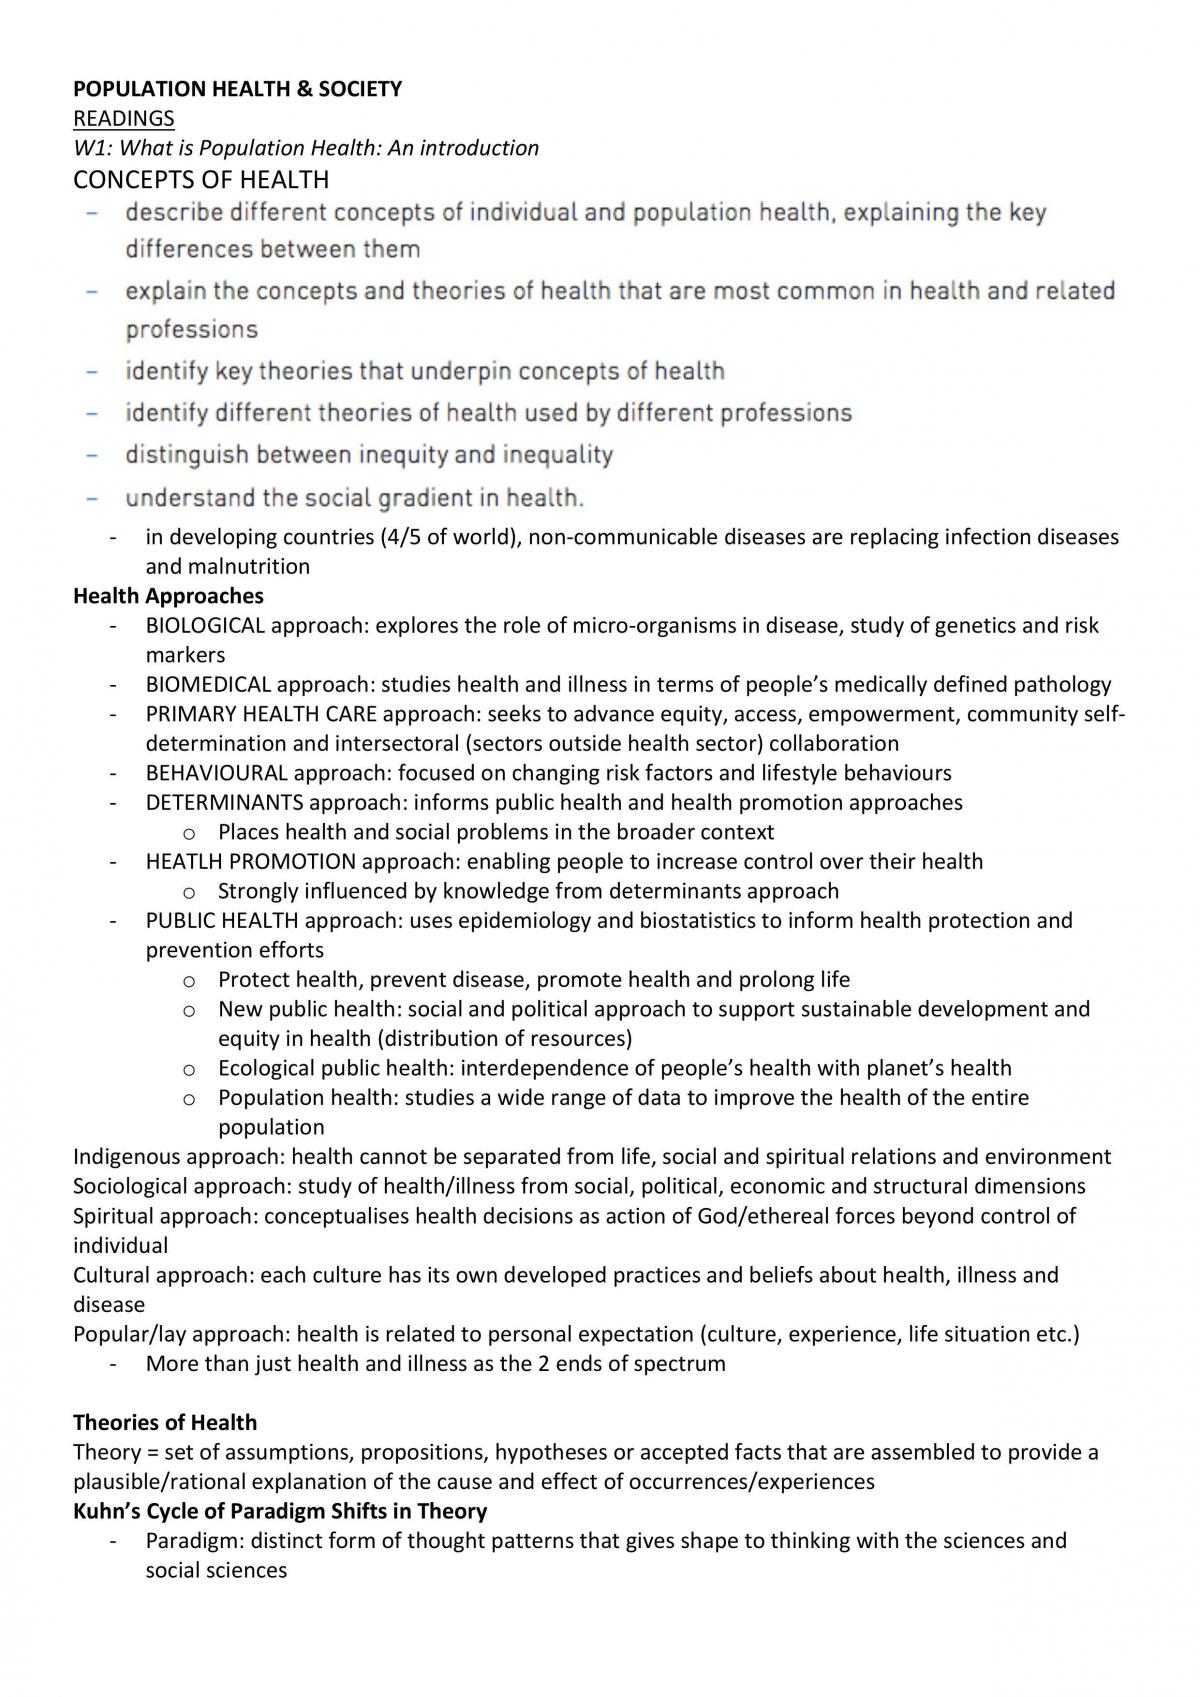 Population Health and Society - Page 1